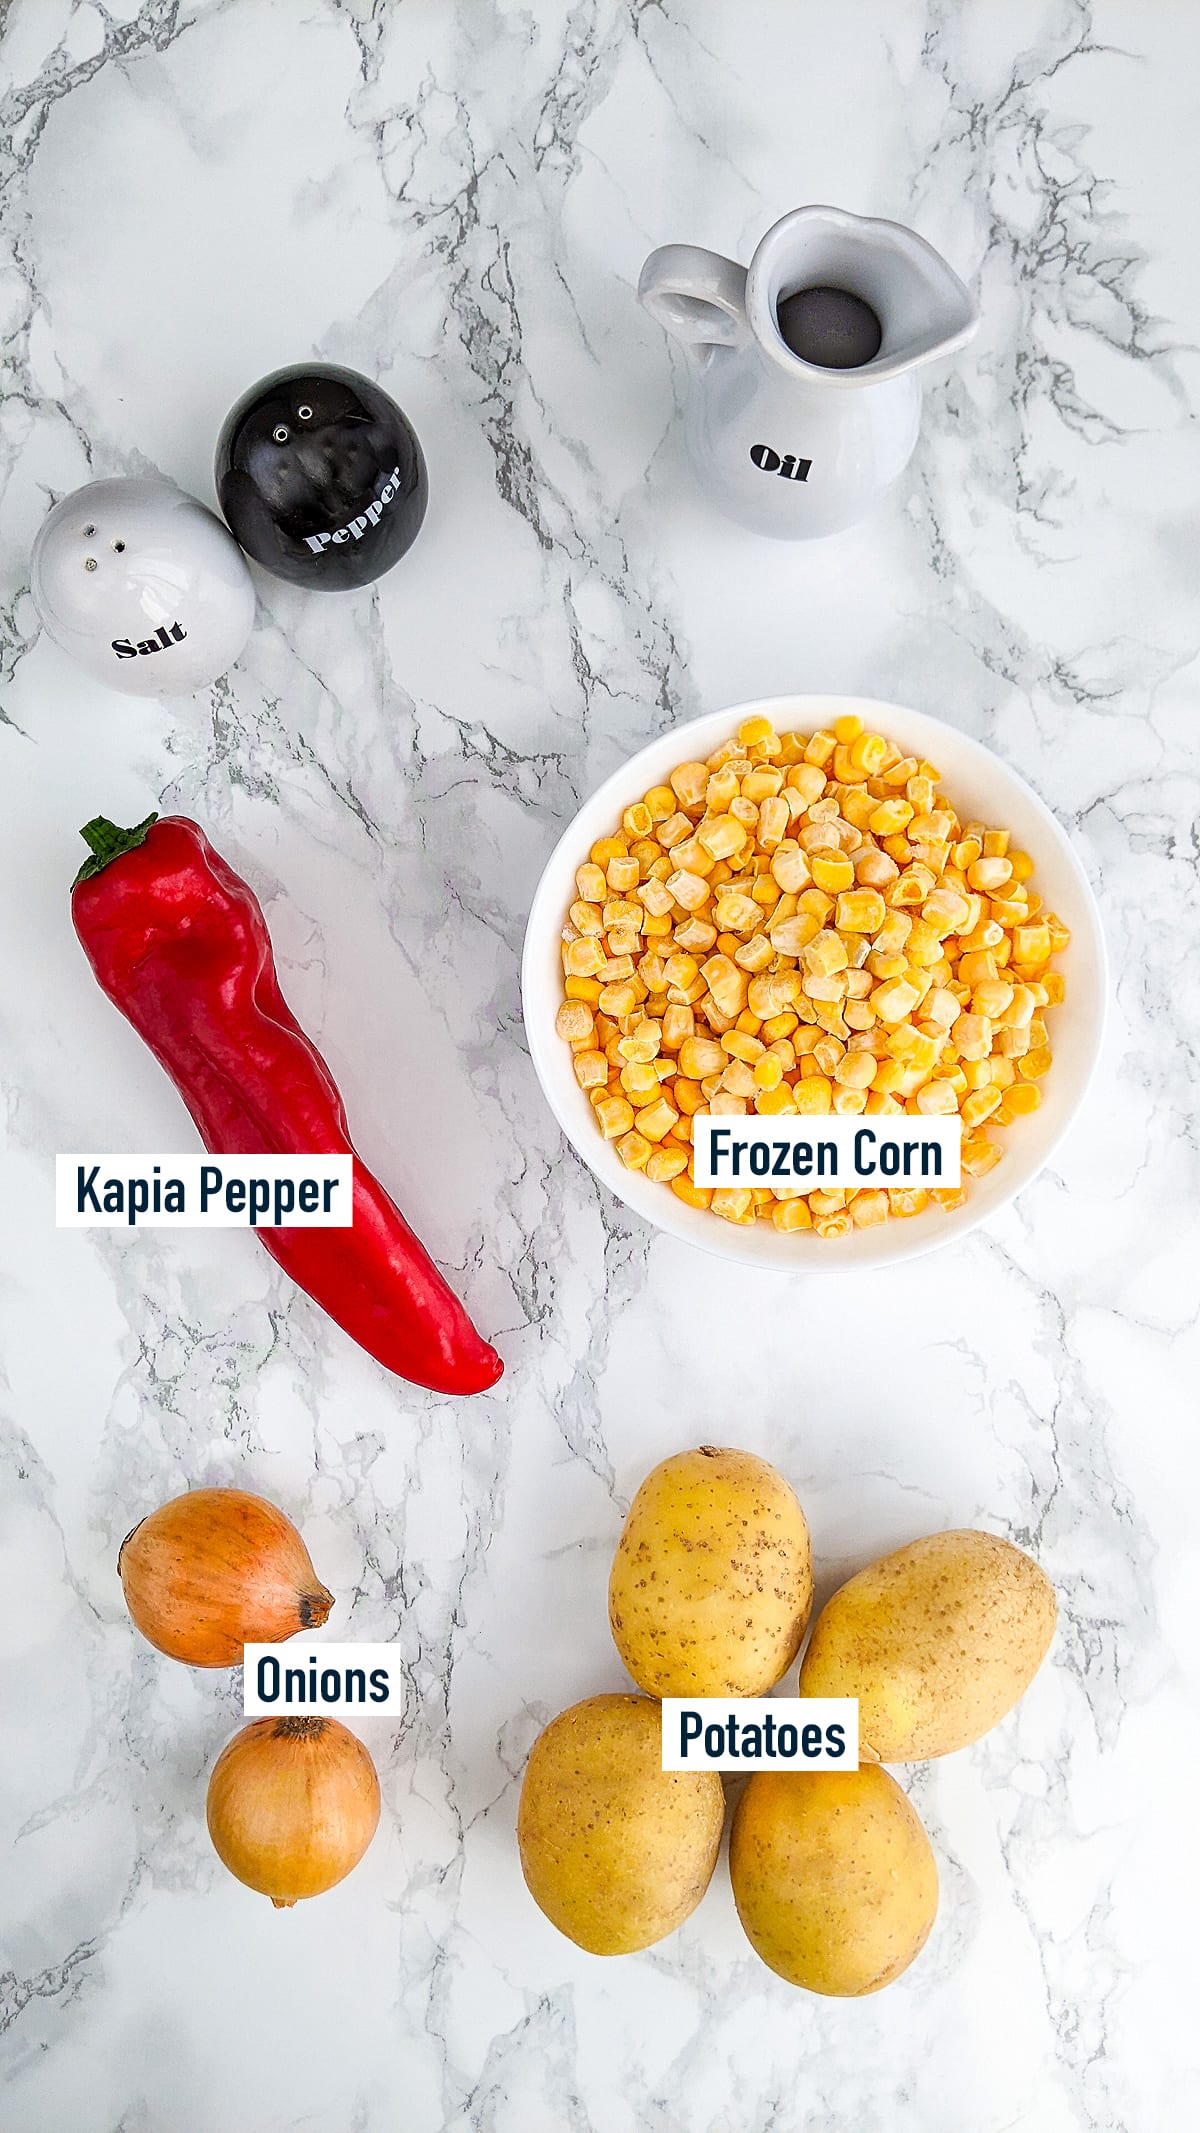 Frozen corn, potatoes, onions and kapia pepper on a marble table.